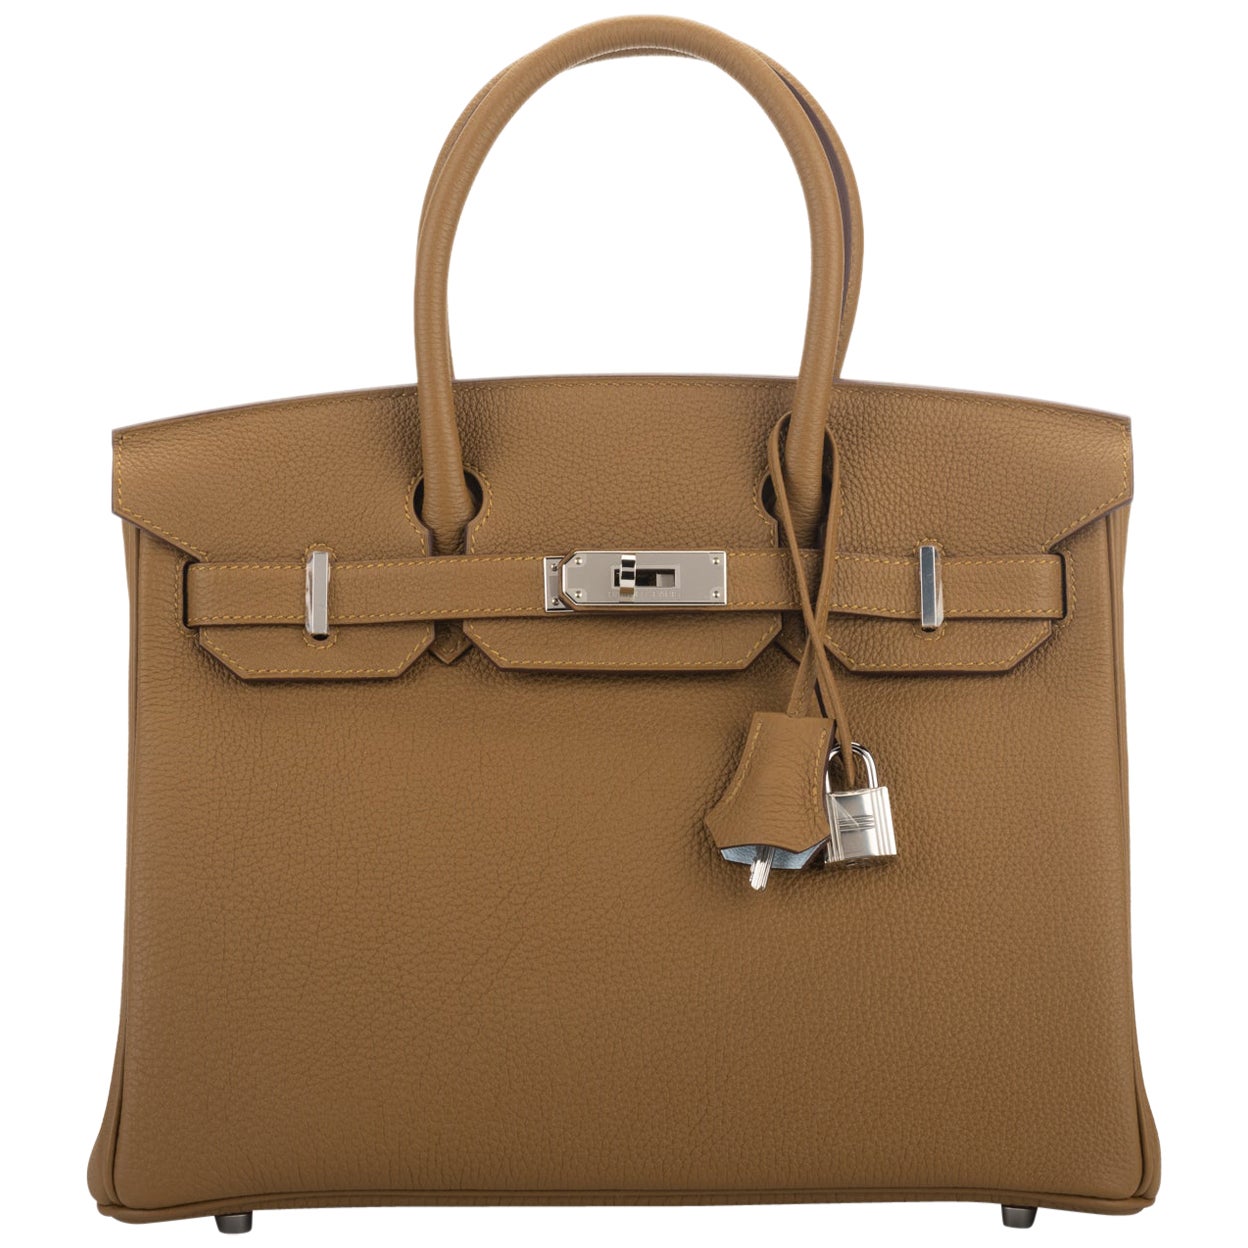 New in Box Hermes Birkin 30 Bronze Verso Blume Bag Limited Edition at ...